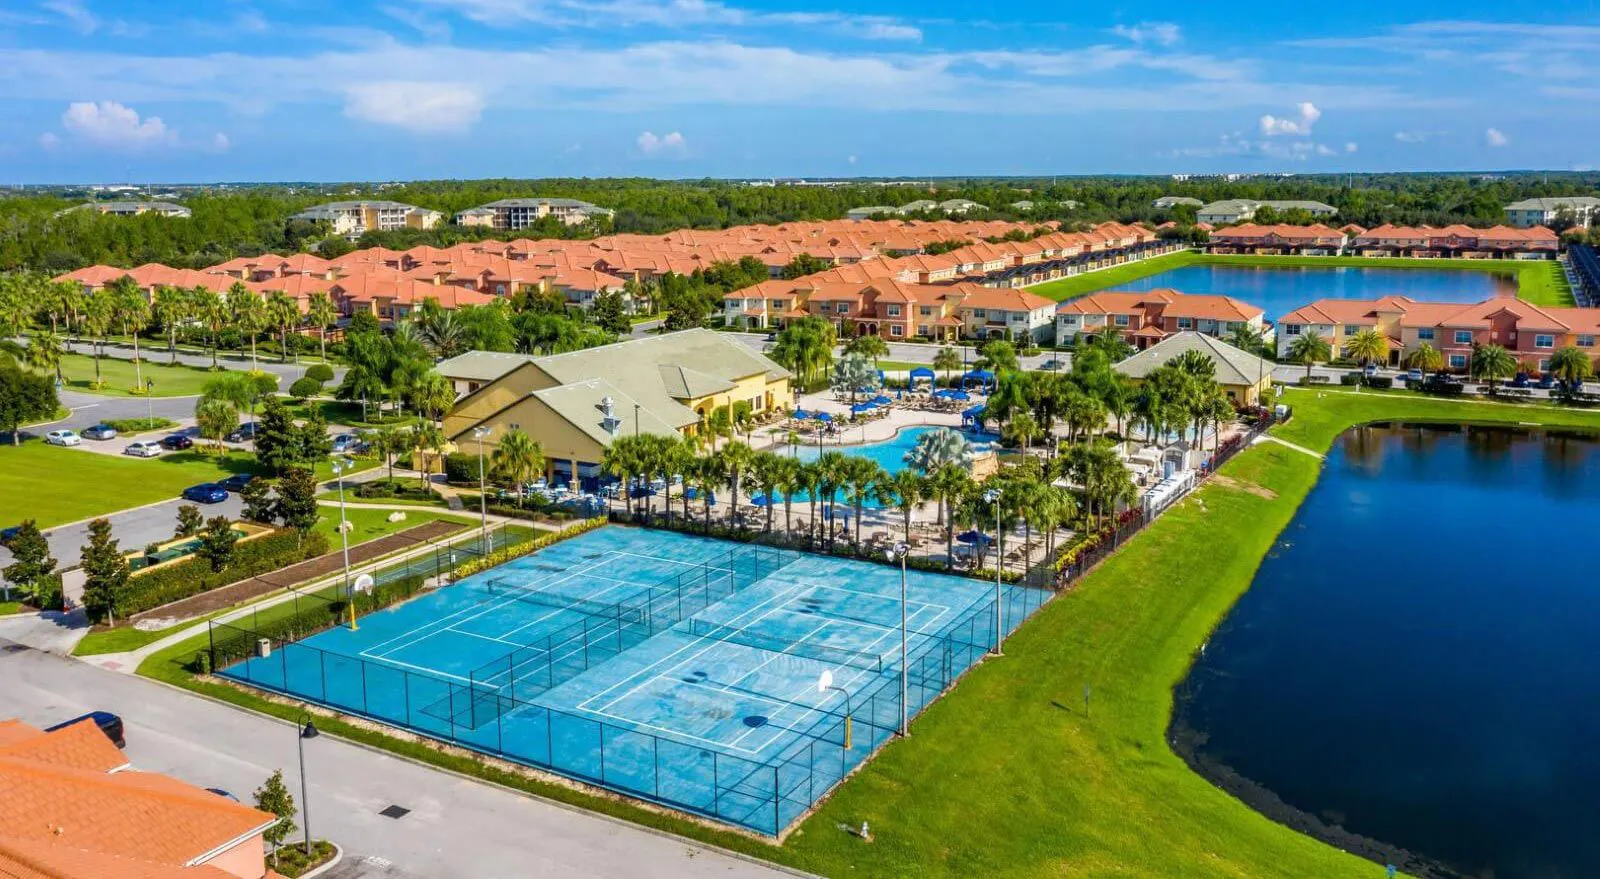 Paradise Palms Resort tennis courts and resort pool